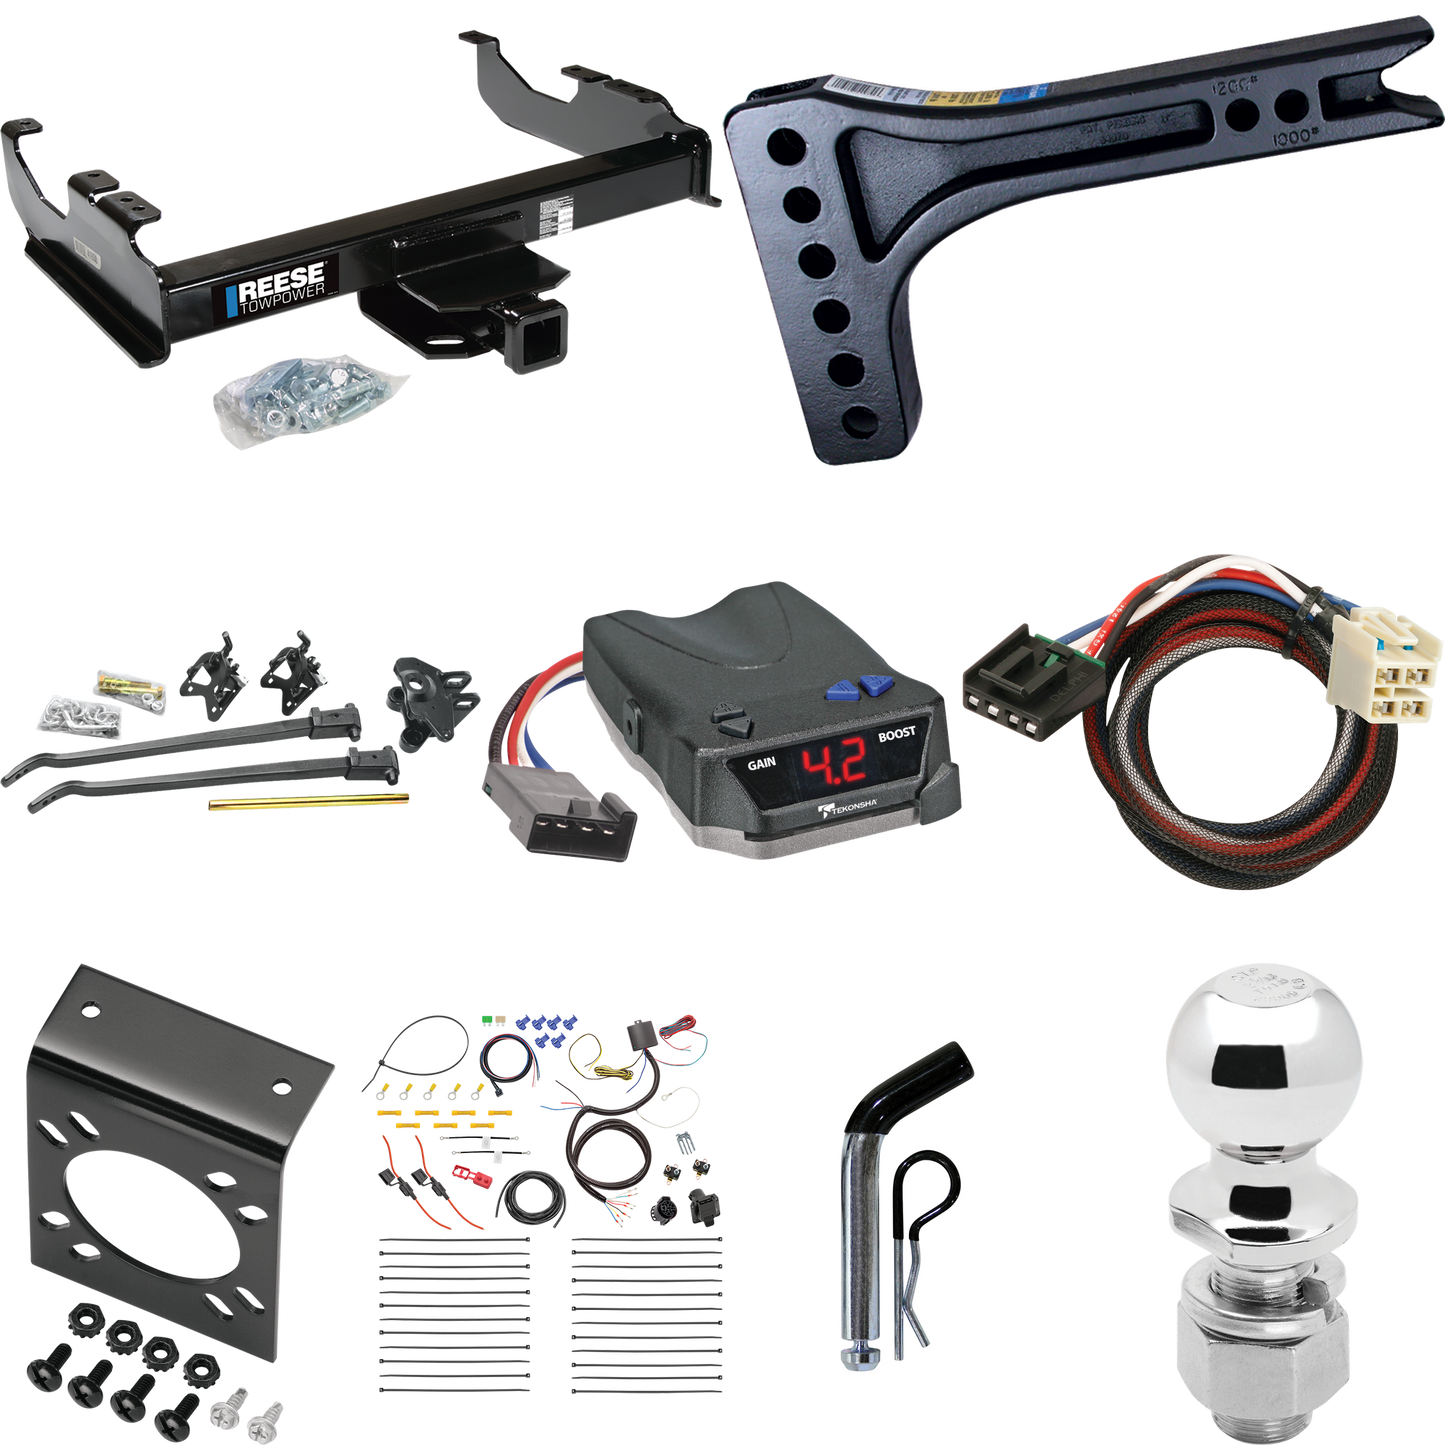 Fits 2015-2019 GMC Sierra 3500 HD Trailer Hitch Tow PKG w/ 15K Trunnion Bar Weight Distribution Hitch + Pin/Clip + 2-5/16" Ball + Tekonsha BRAKE-EVN Brake Control + Plug & Play BC Adapter + 7-Way RV Wiring (For Cab & Chassis, w/34" Wide Frames Models